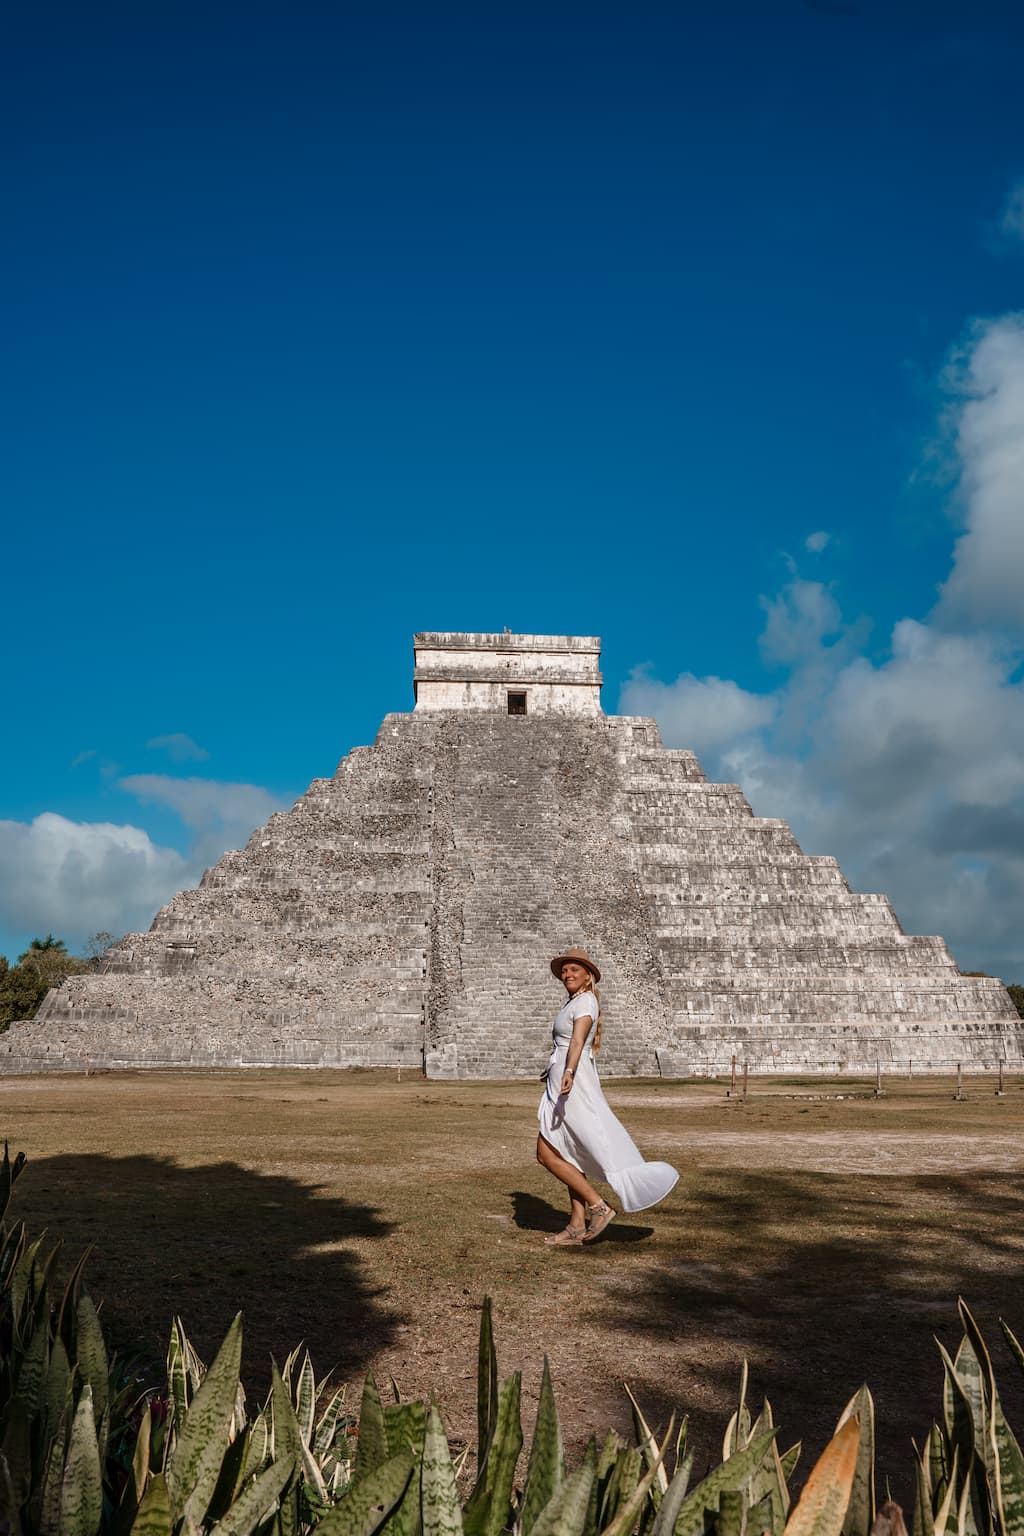 Chichen Itza as part of 3 weeks in Mexico Itinerary.